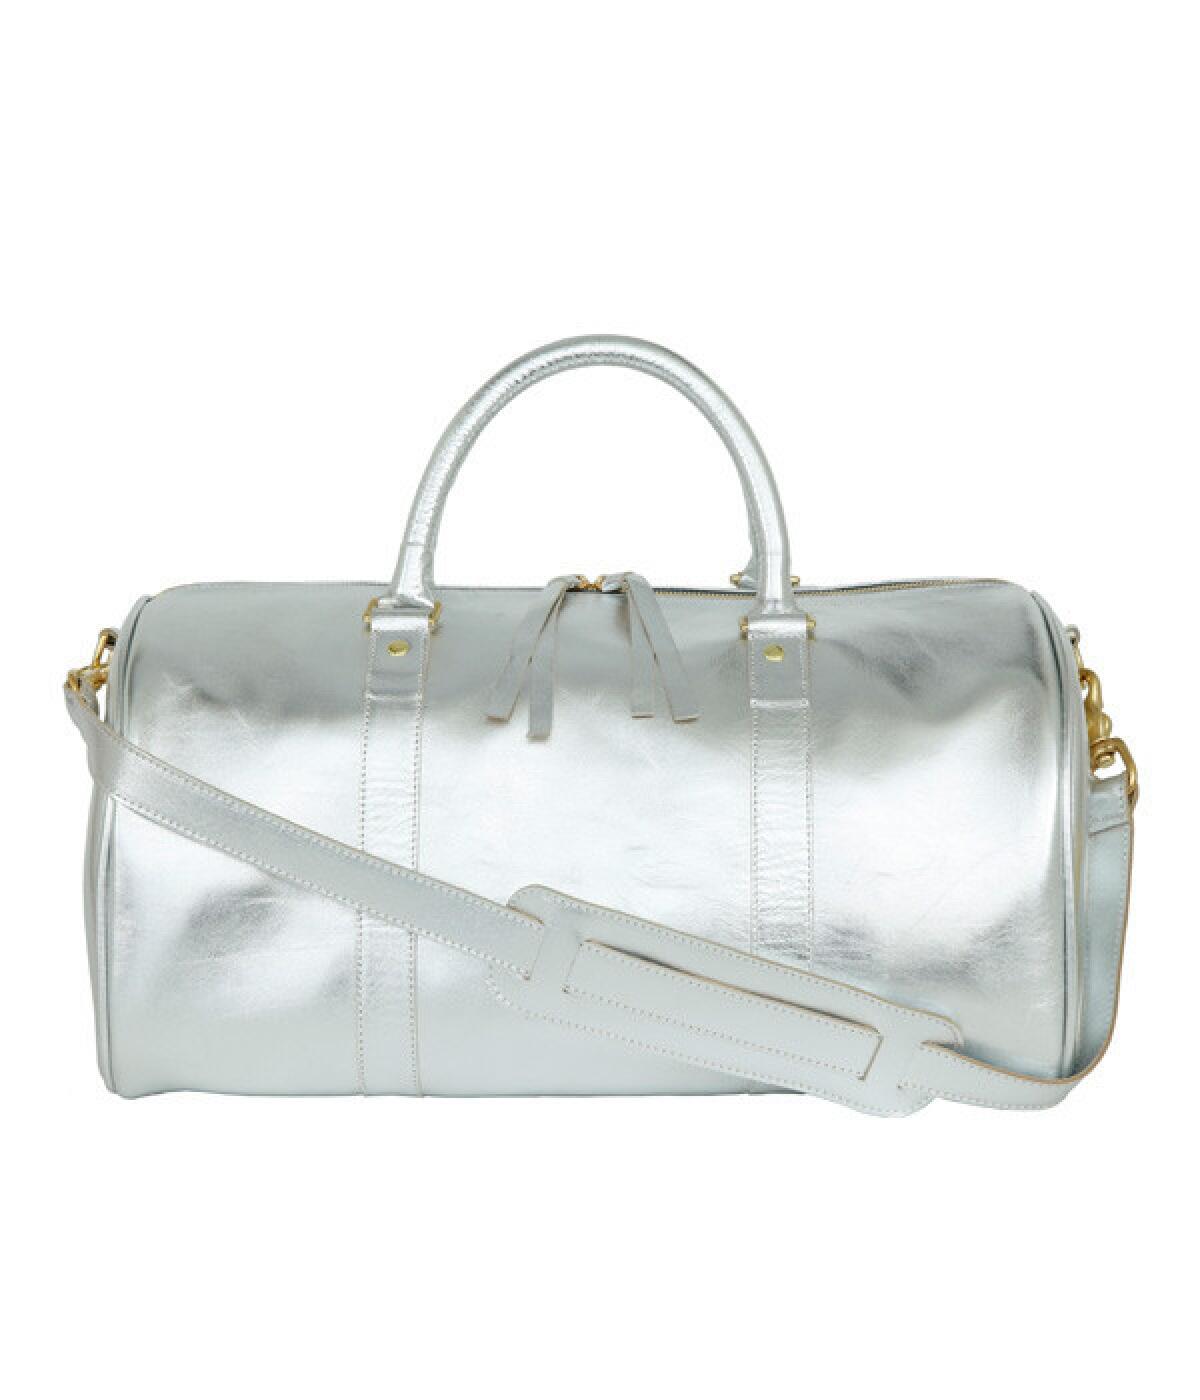 Clare Vivier leather "Duffle Grand" bag.